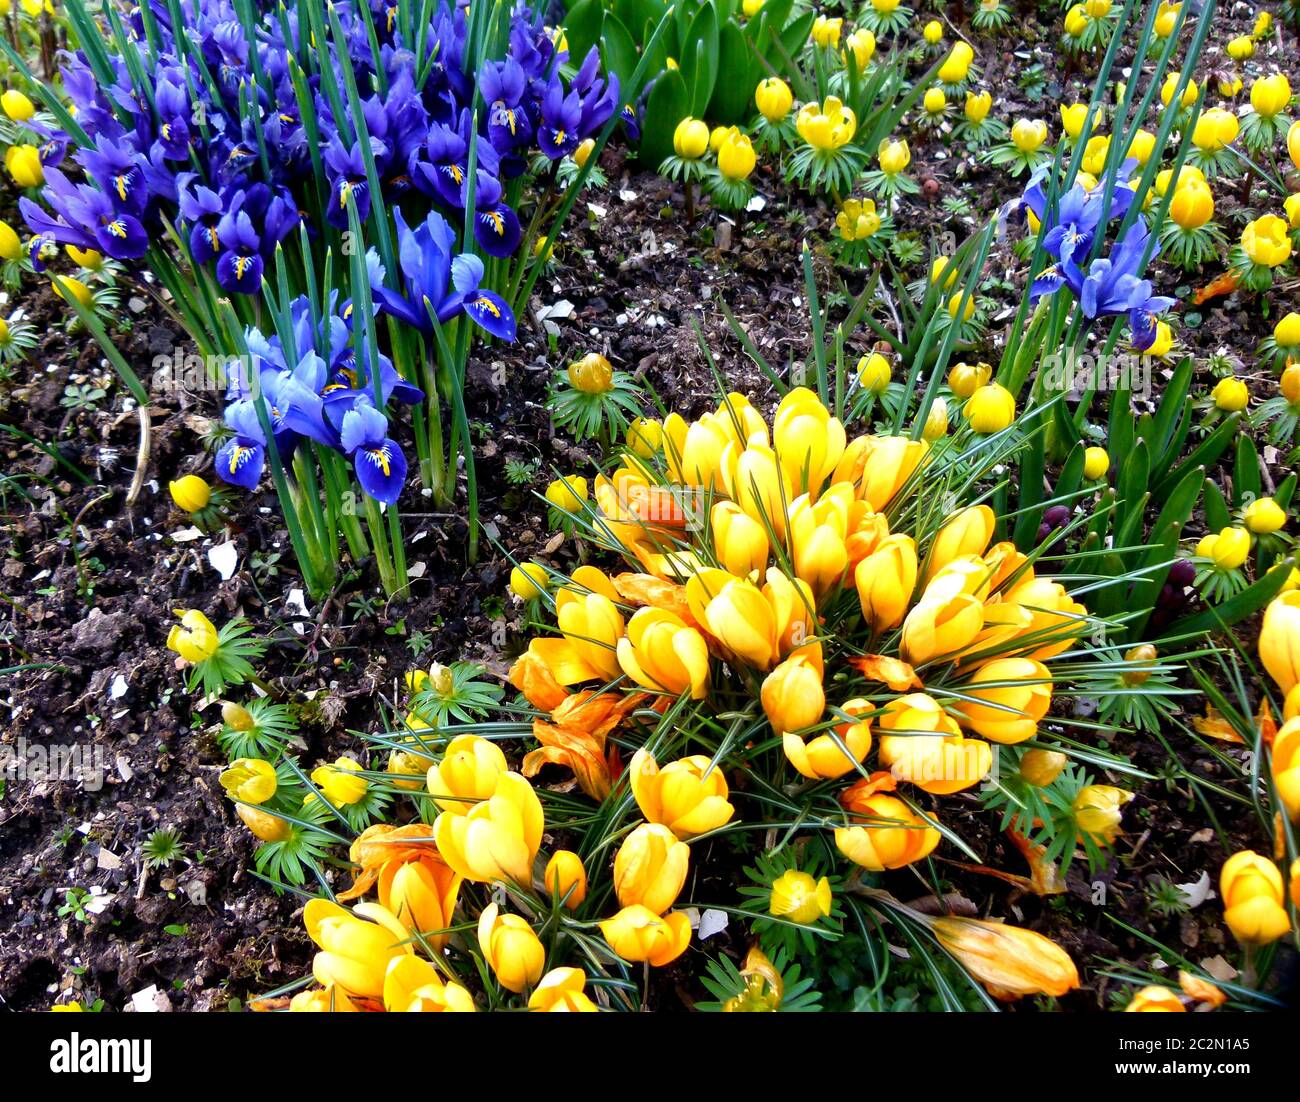 blue dwarf lilies and yellow crocuses in the spring garden Stock Photo